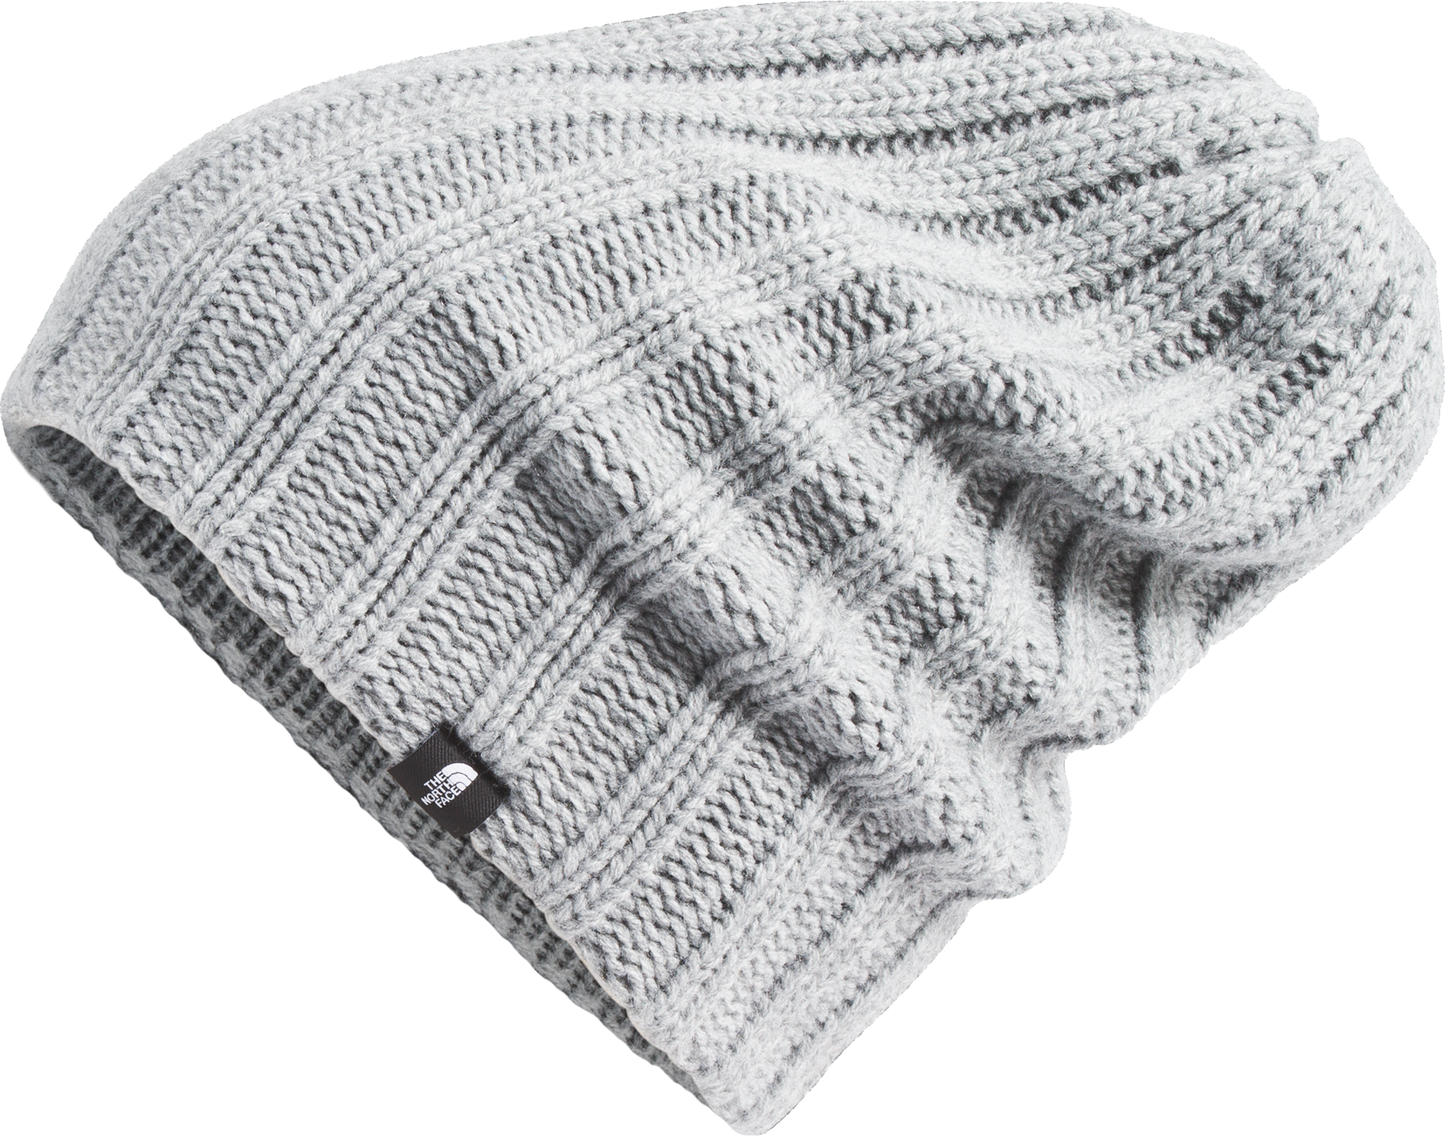 The North Face Accessories Shinsky Beanie Light Grey Heather